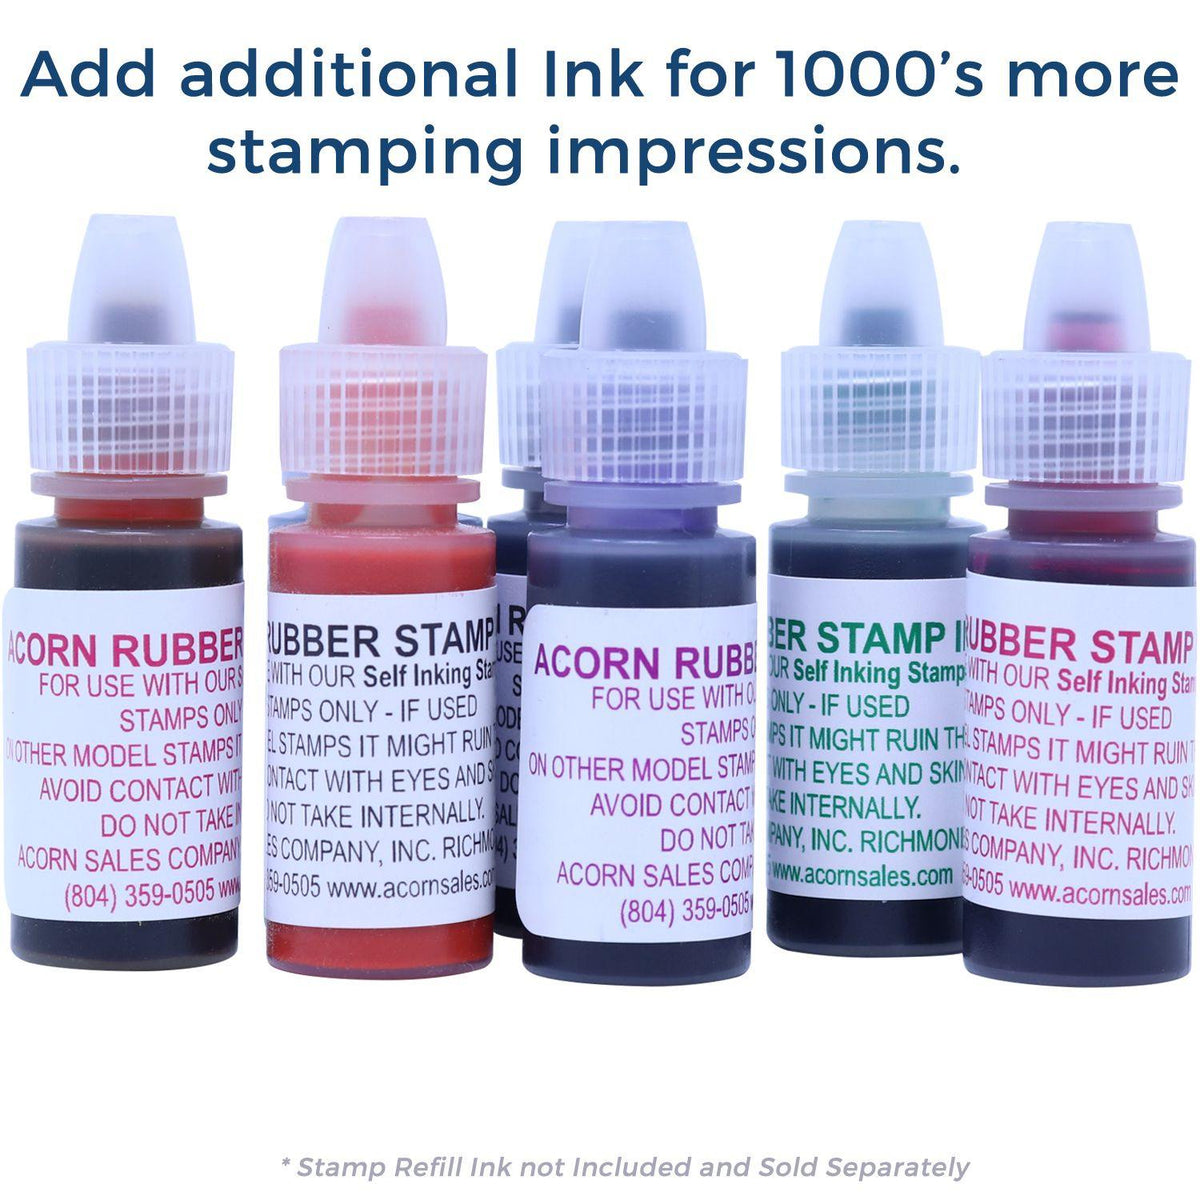 Refill Inks for Large Pre-Inked Strikeout Stamp Available